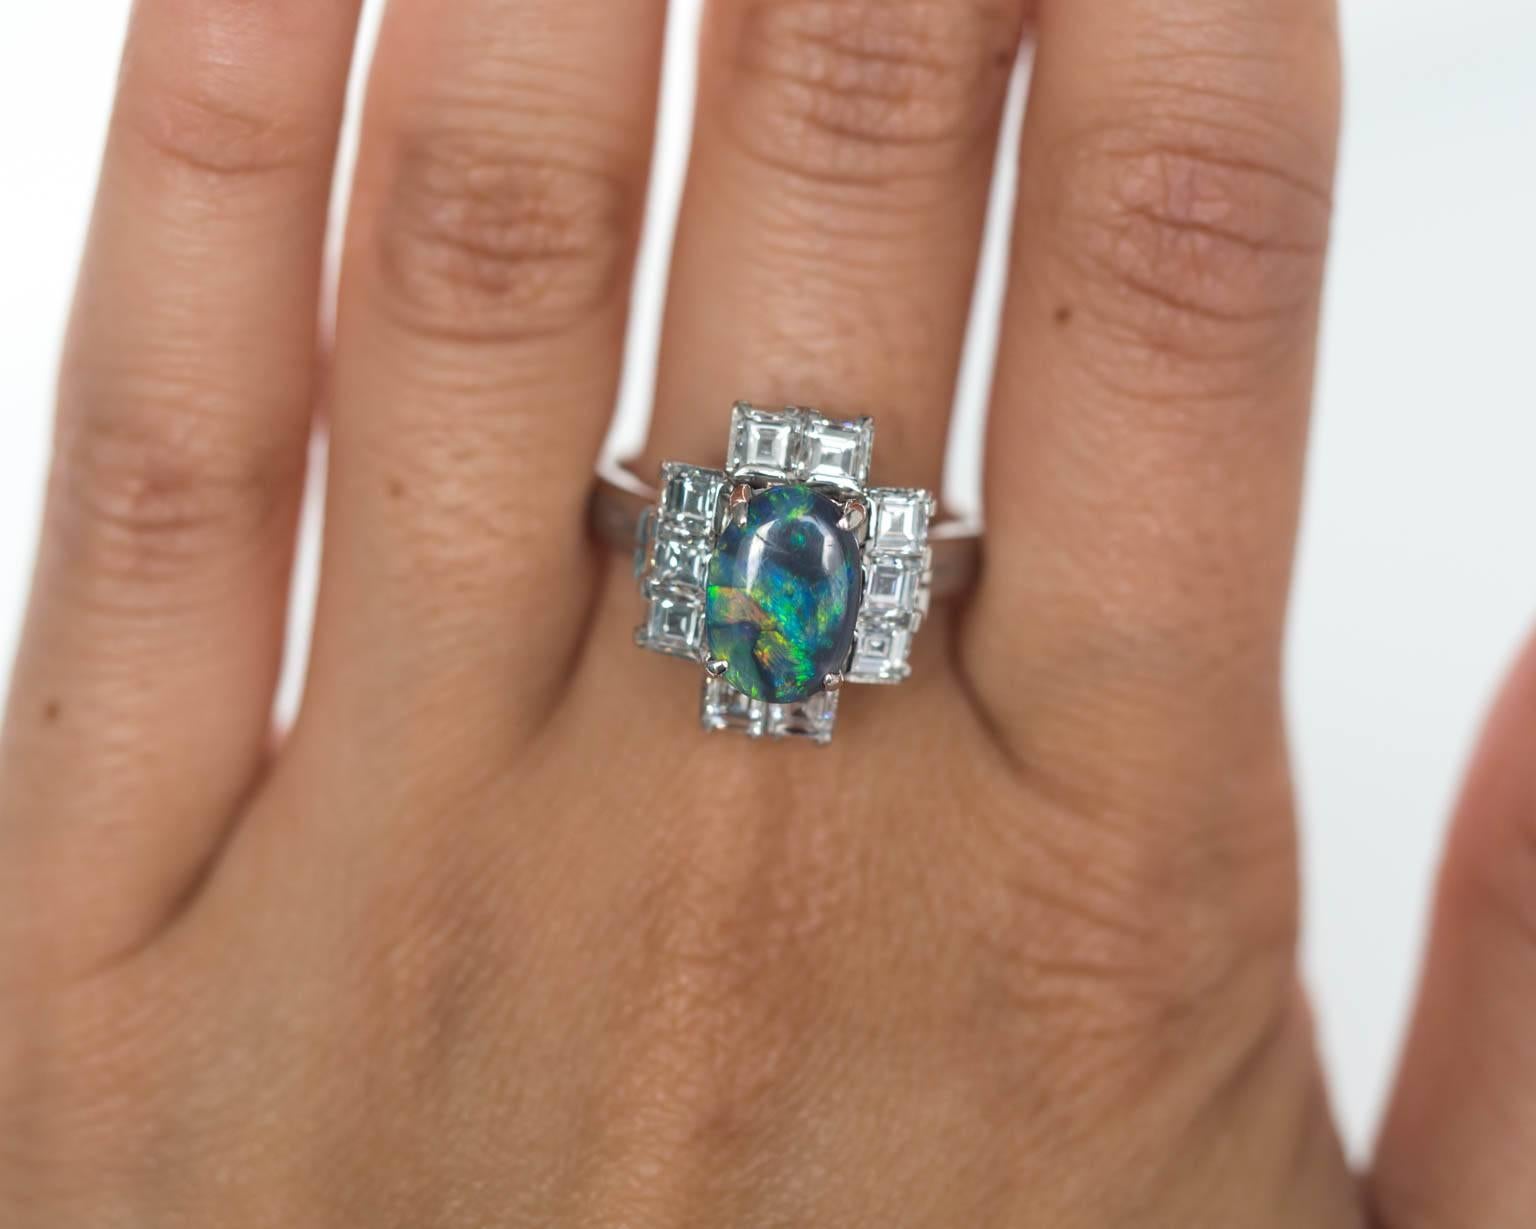 Here we have an absolutely stunning Black Opal and Asscher-Cut old cut diamonds deco jewel from circa 1927! This center stone, a *gorgeous* opal, oval shape has strong hues of neon green and black is prong set with 4 prongs. The ring is truly very